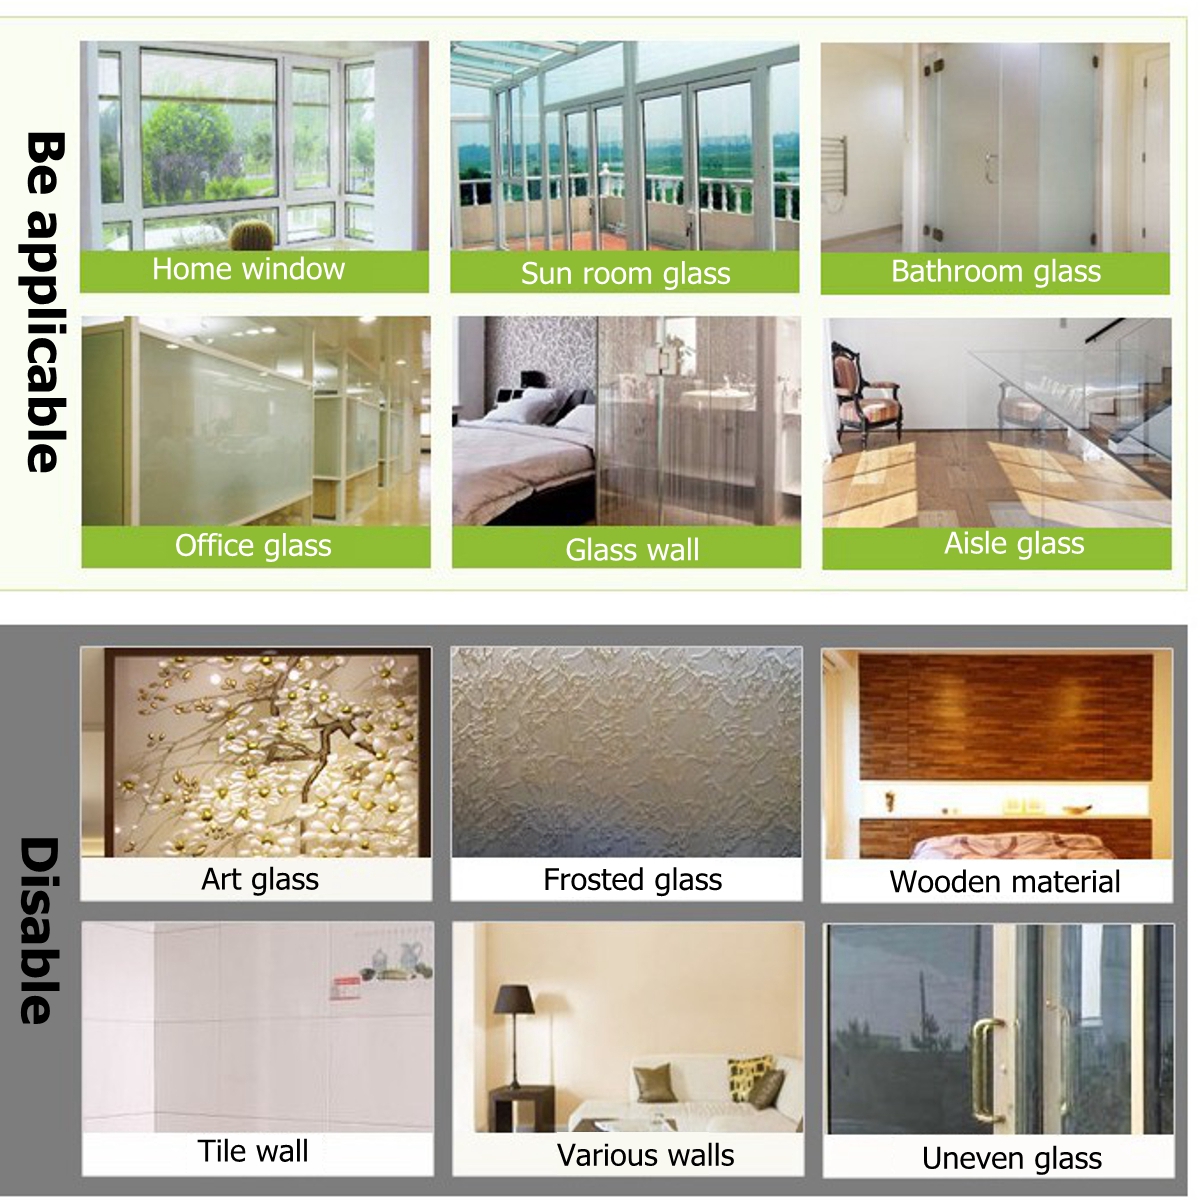 Static-Cling-Glueless-Reusable-Removable-Privacy-Frosted-Decor-Window-Glass-Film-1824221-5